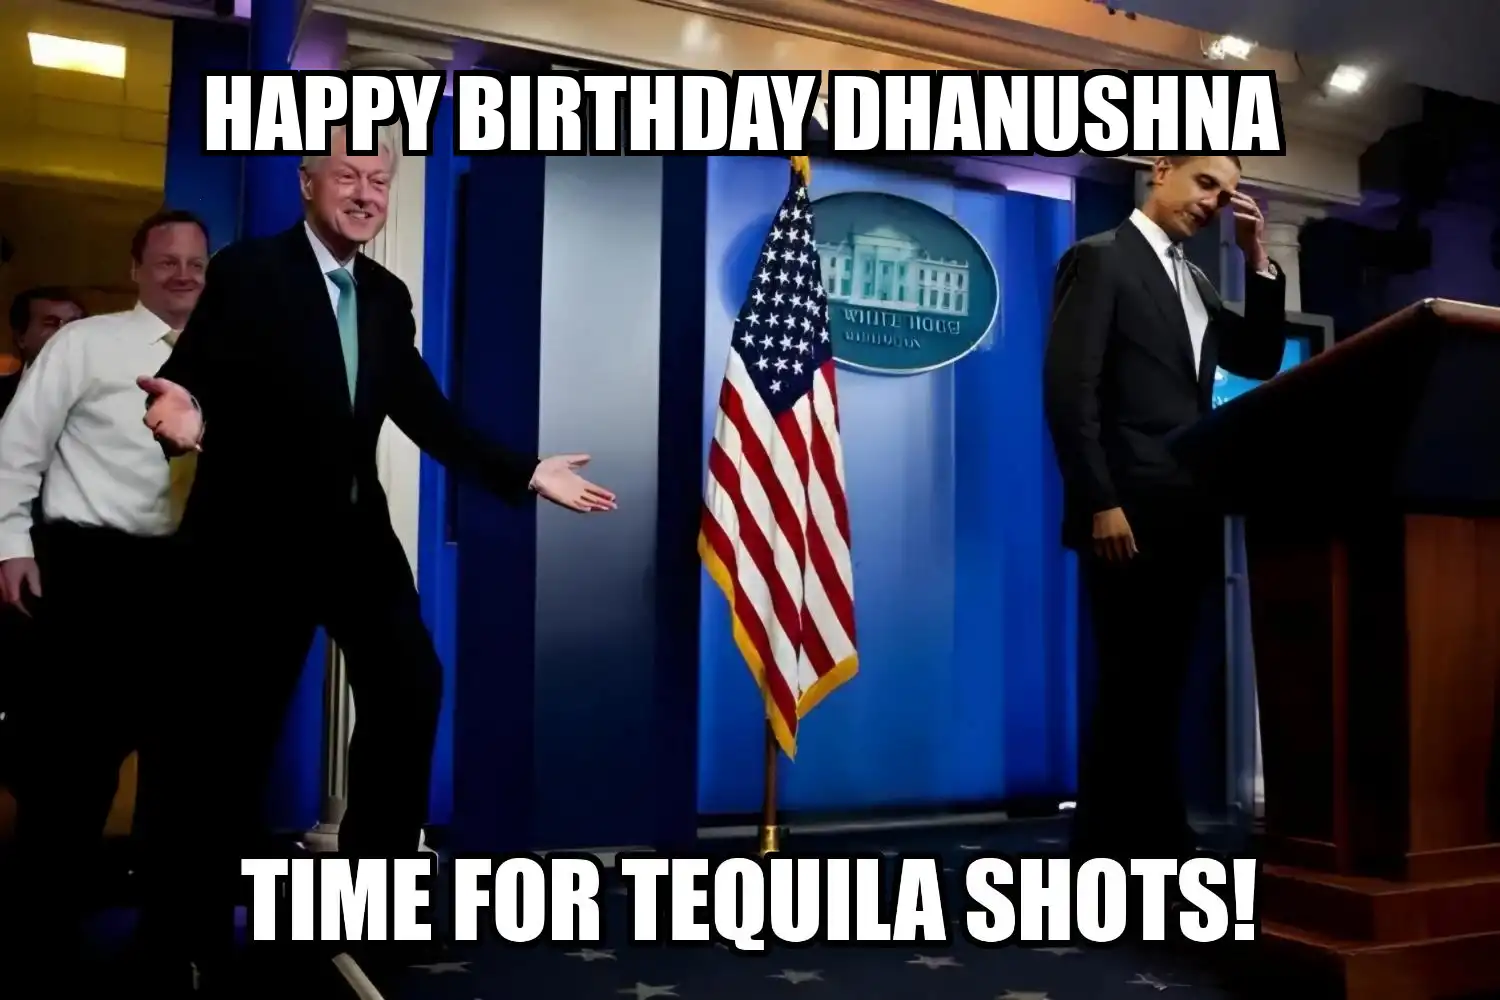 Happy Birthday Dhanushna Time For Tequila Shots Memes